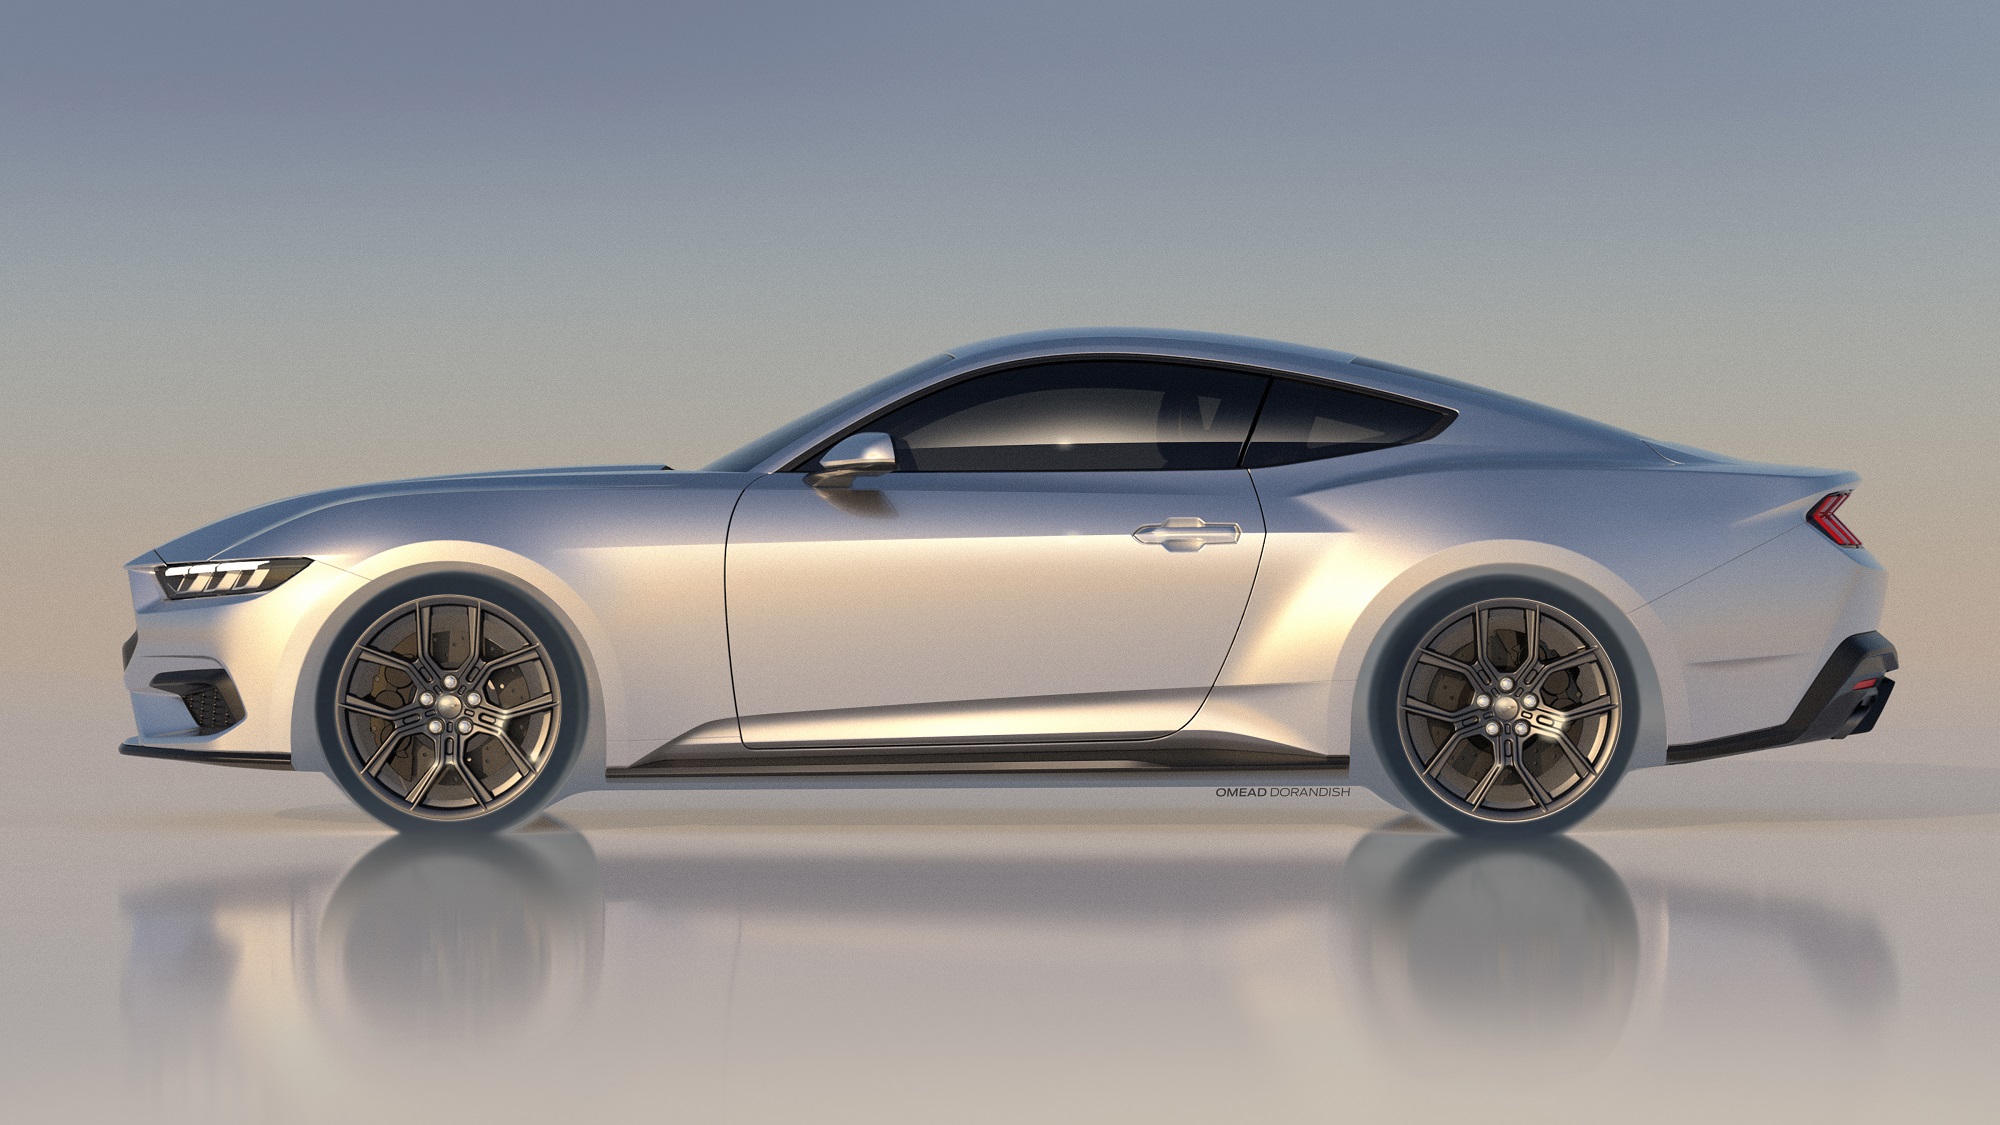 A new Ford Mustang EcoBoost like this silver concept deserves a strong car name.